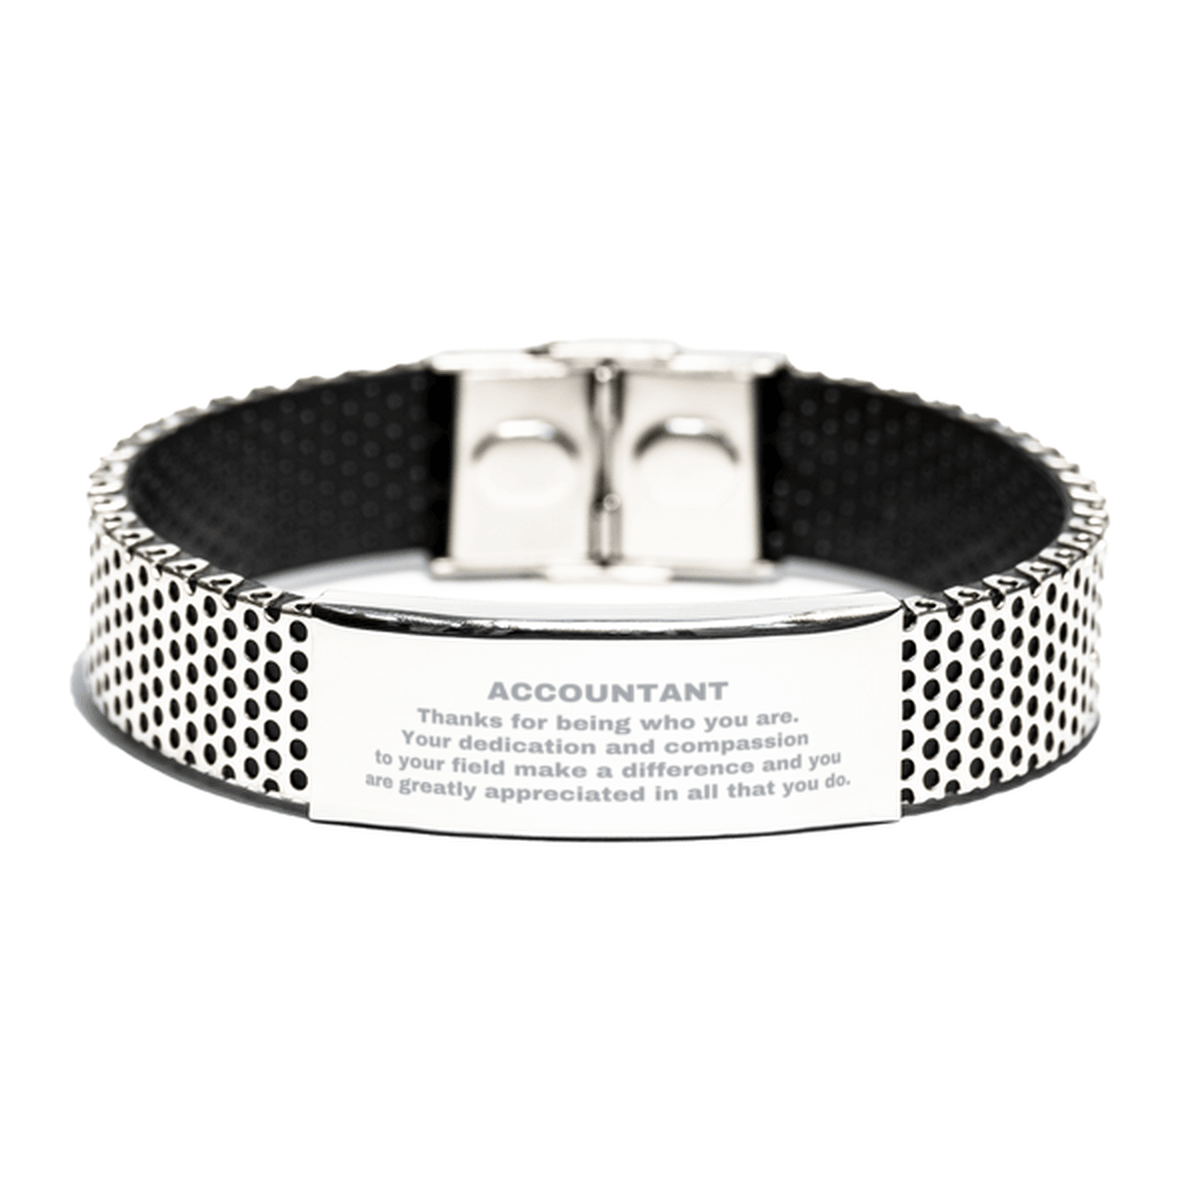 Accountant Silver Shark Mesh Stainless Steel Engraved Bracelet - Thanks for being who you are - Birthday Christmas Jewelry Gifts Coworkers Colleague Boss - Mallard Moon Gift Shop